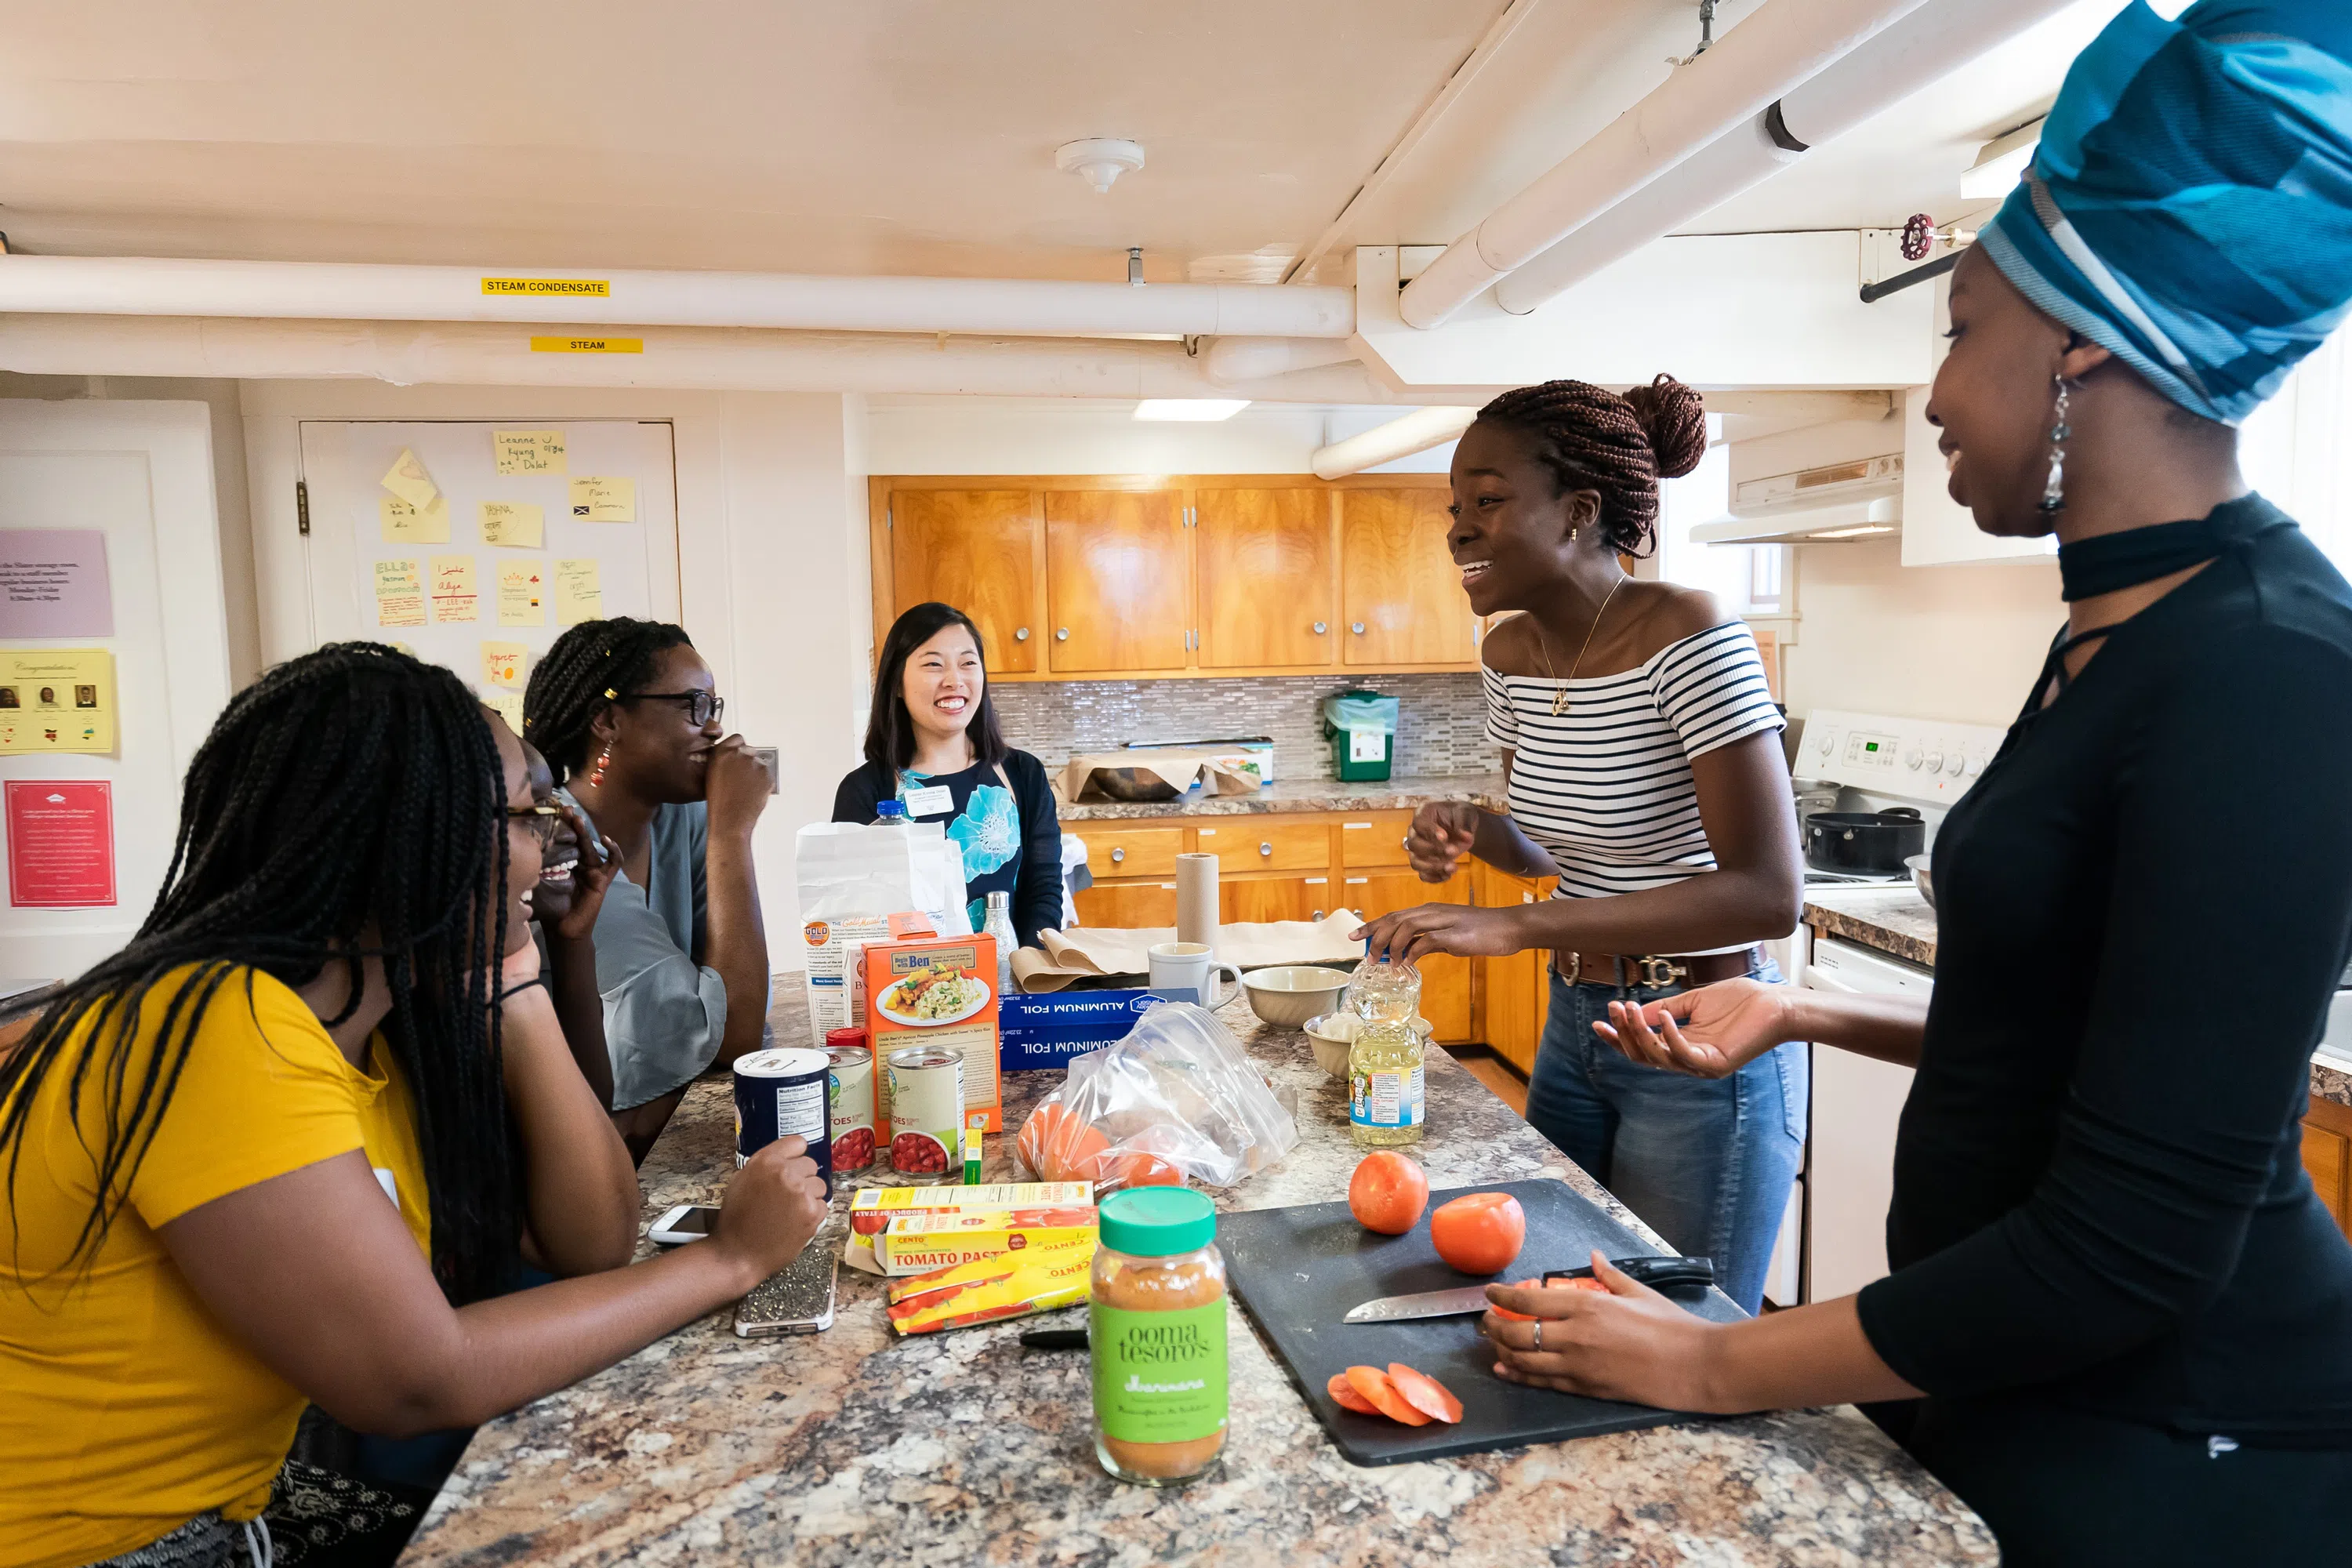 Wellesley students cooking in the Slater International Center kitchen